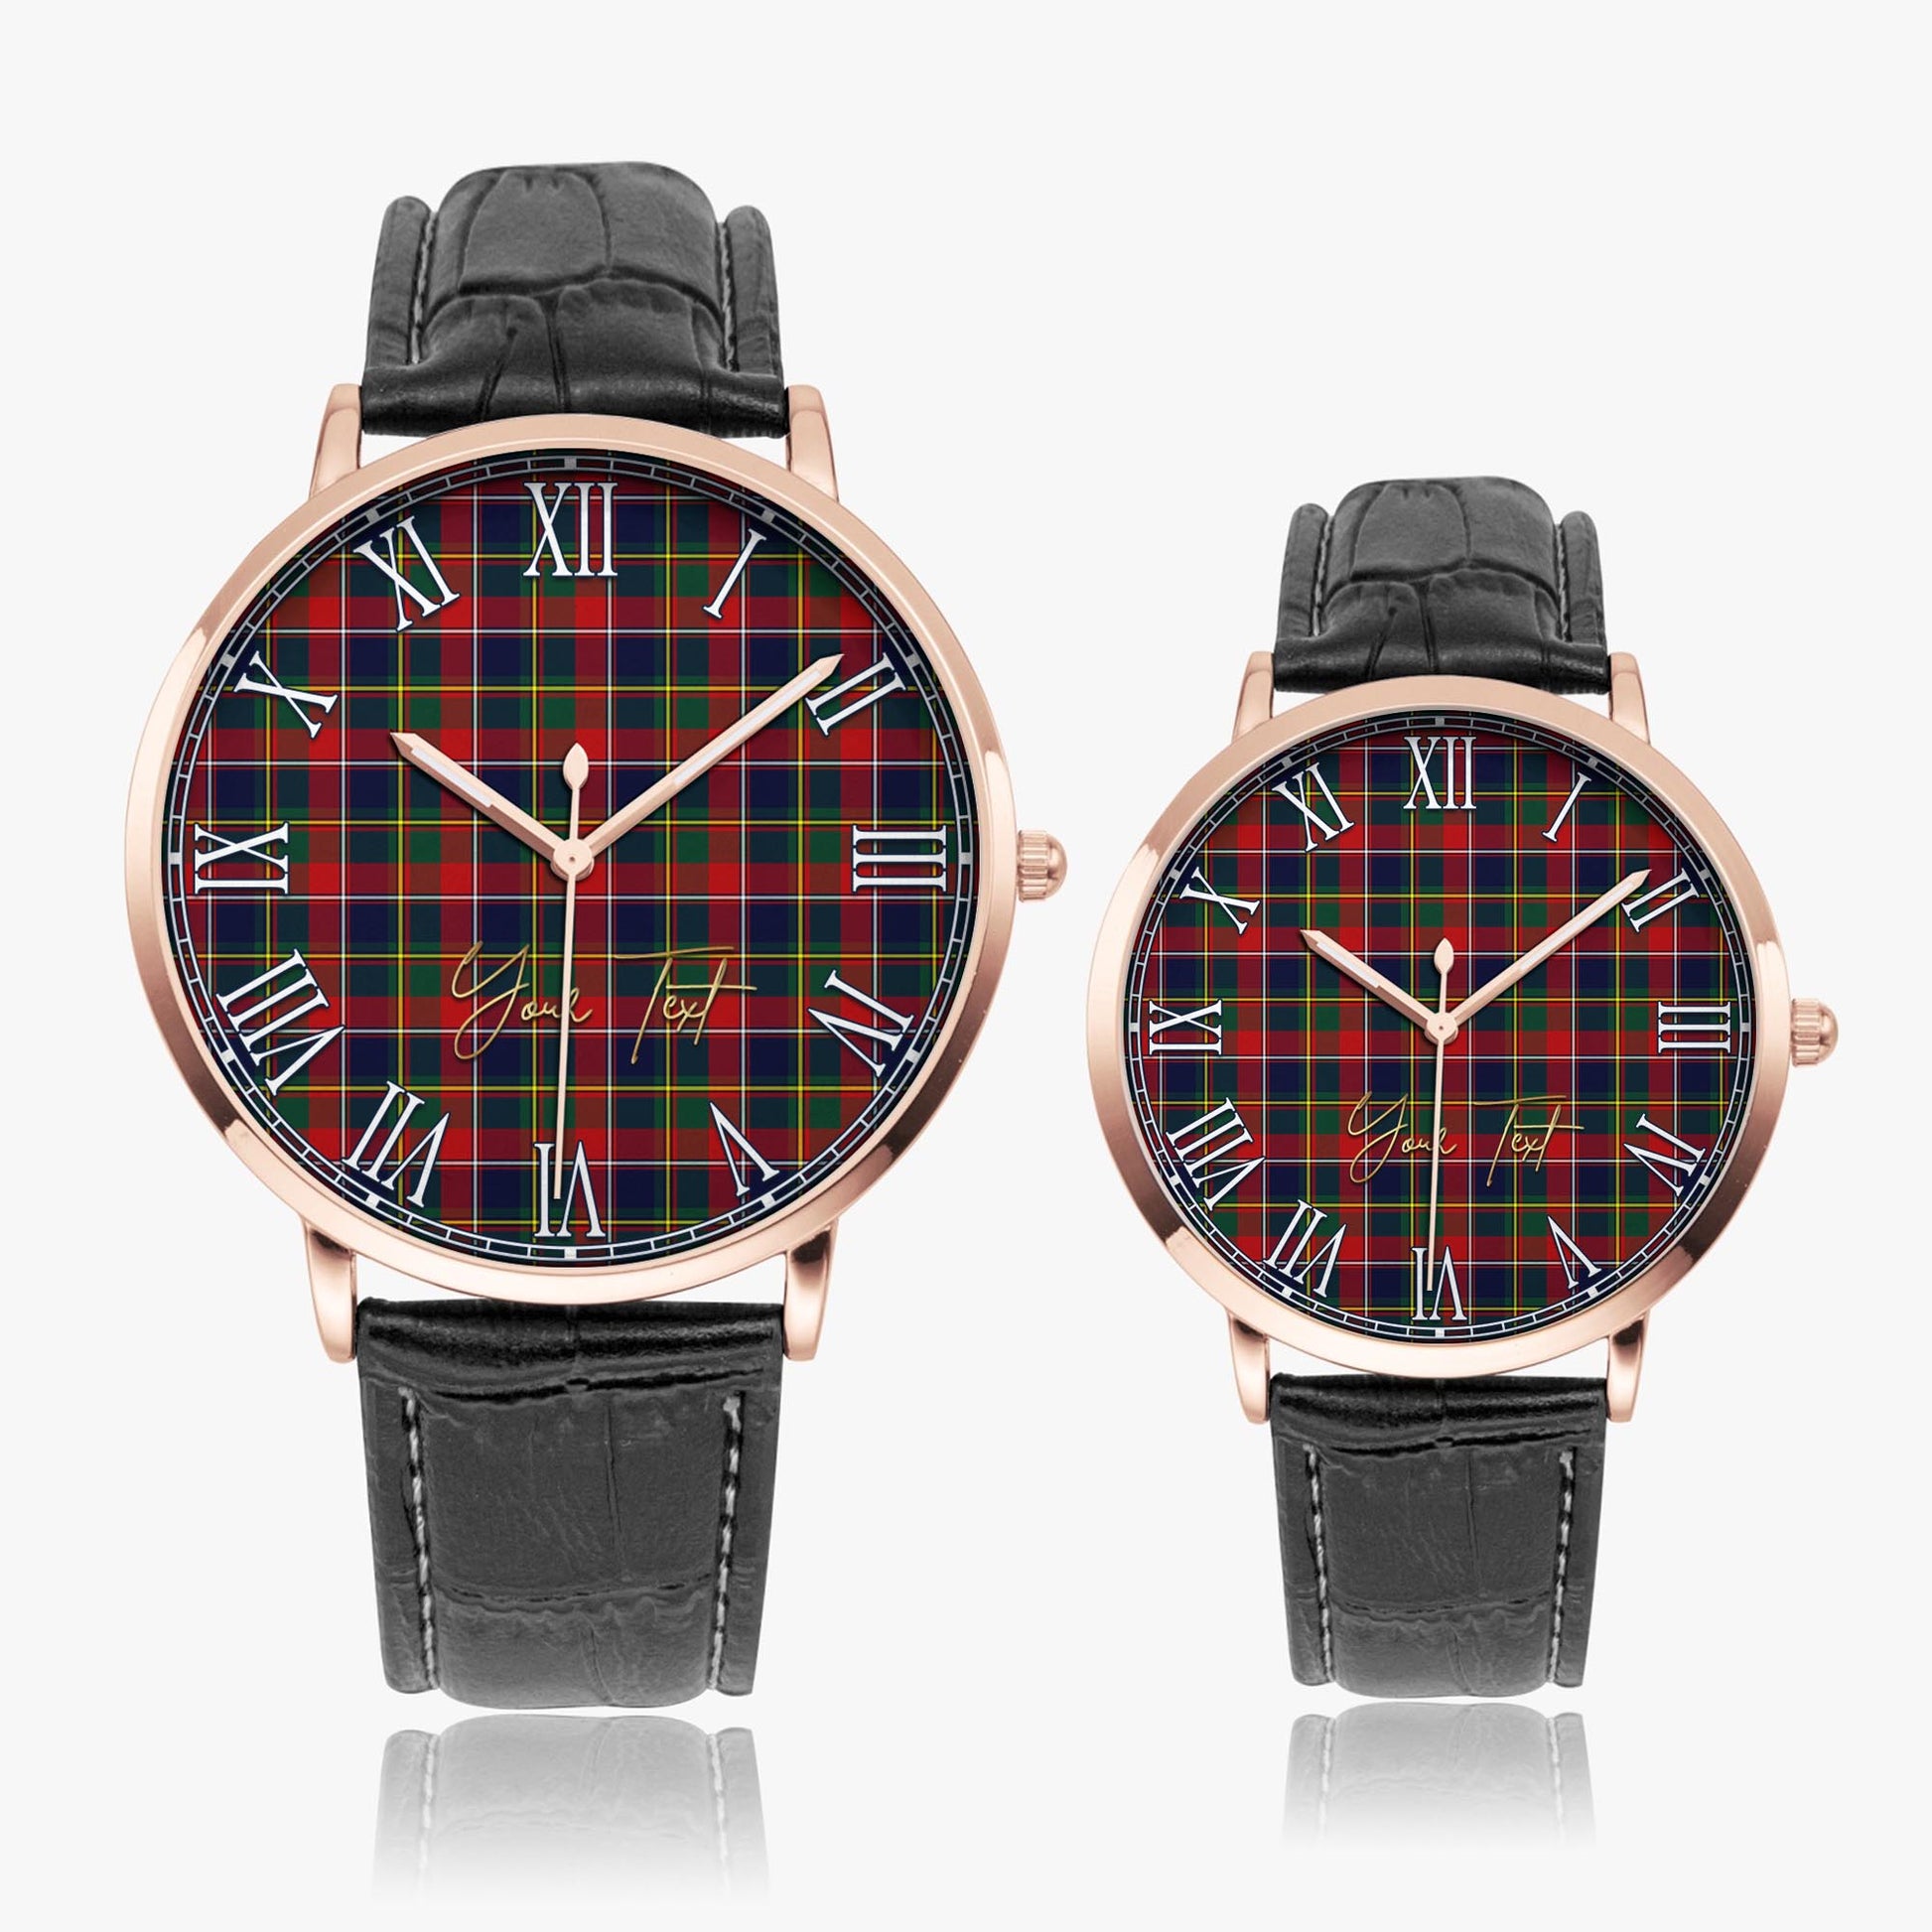 Quebec Province Canada Tartan Personalized Your Text Leather Trap Quartz Watch Ultra Thin Rose Gold Case With Black Leather Strap - Tartanvibesclothing